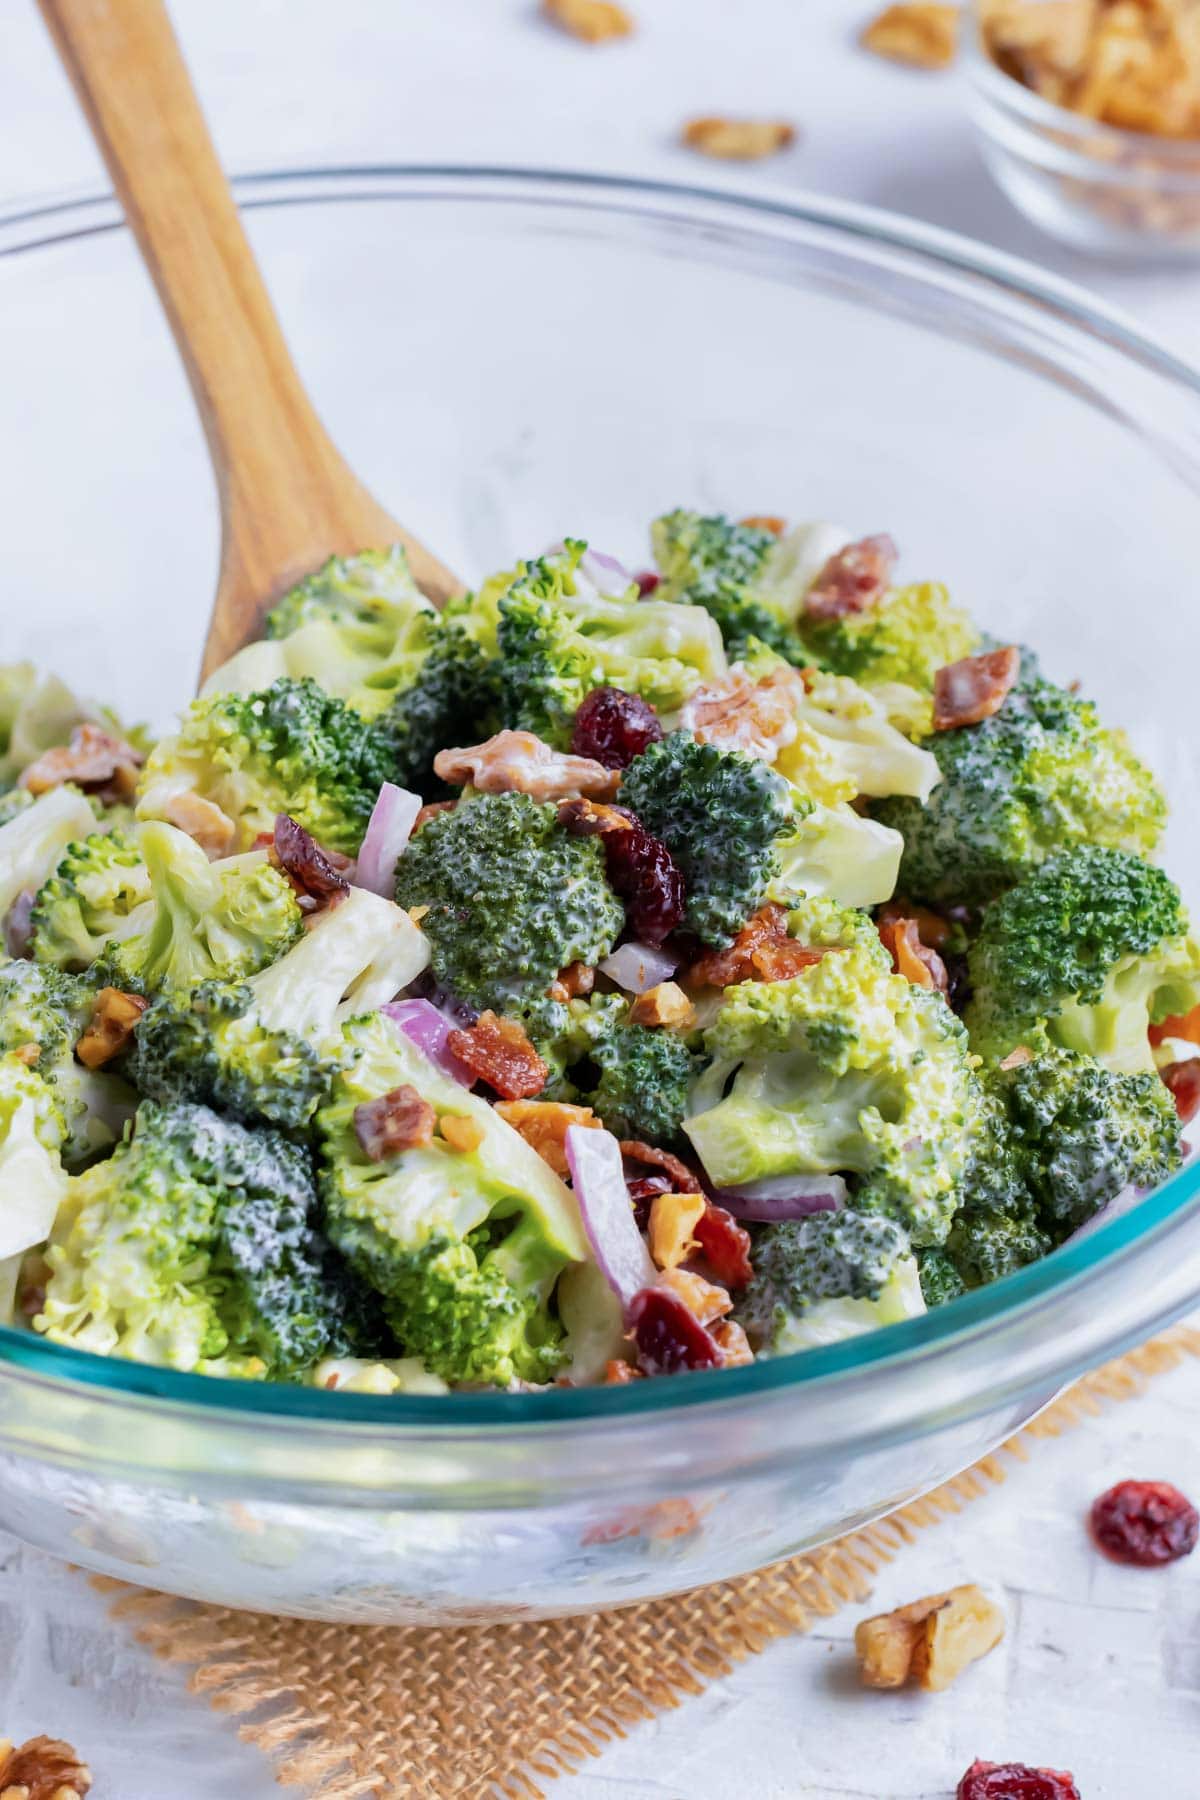 Broccoli Bacon Salad in a clear glass bowl with a wooden spoon stirring it.